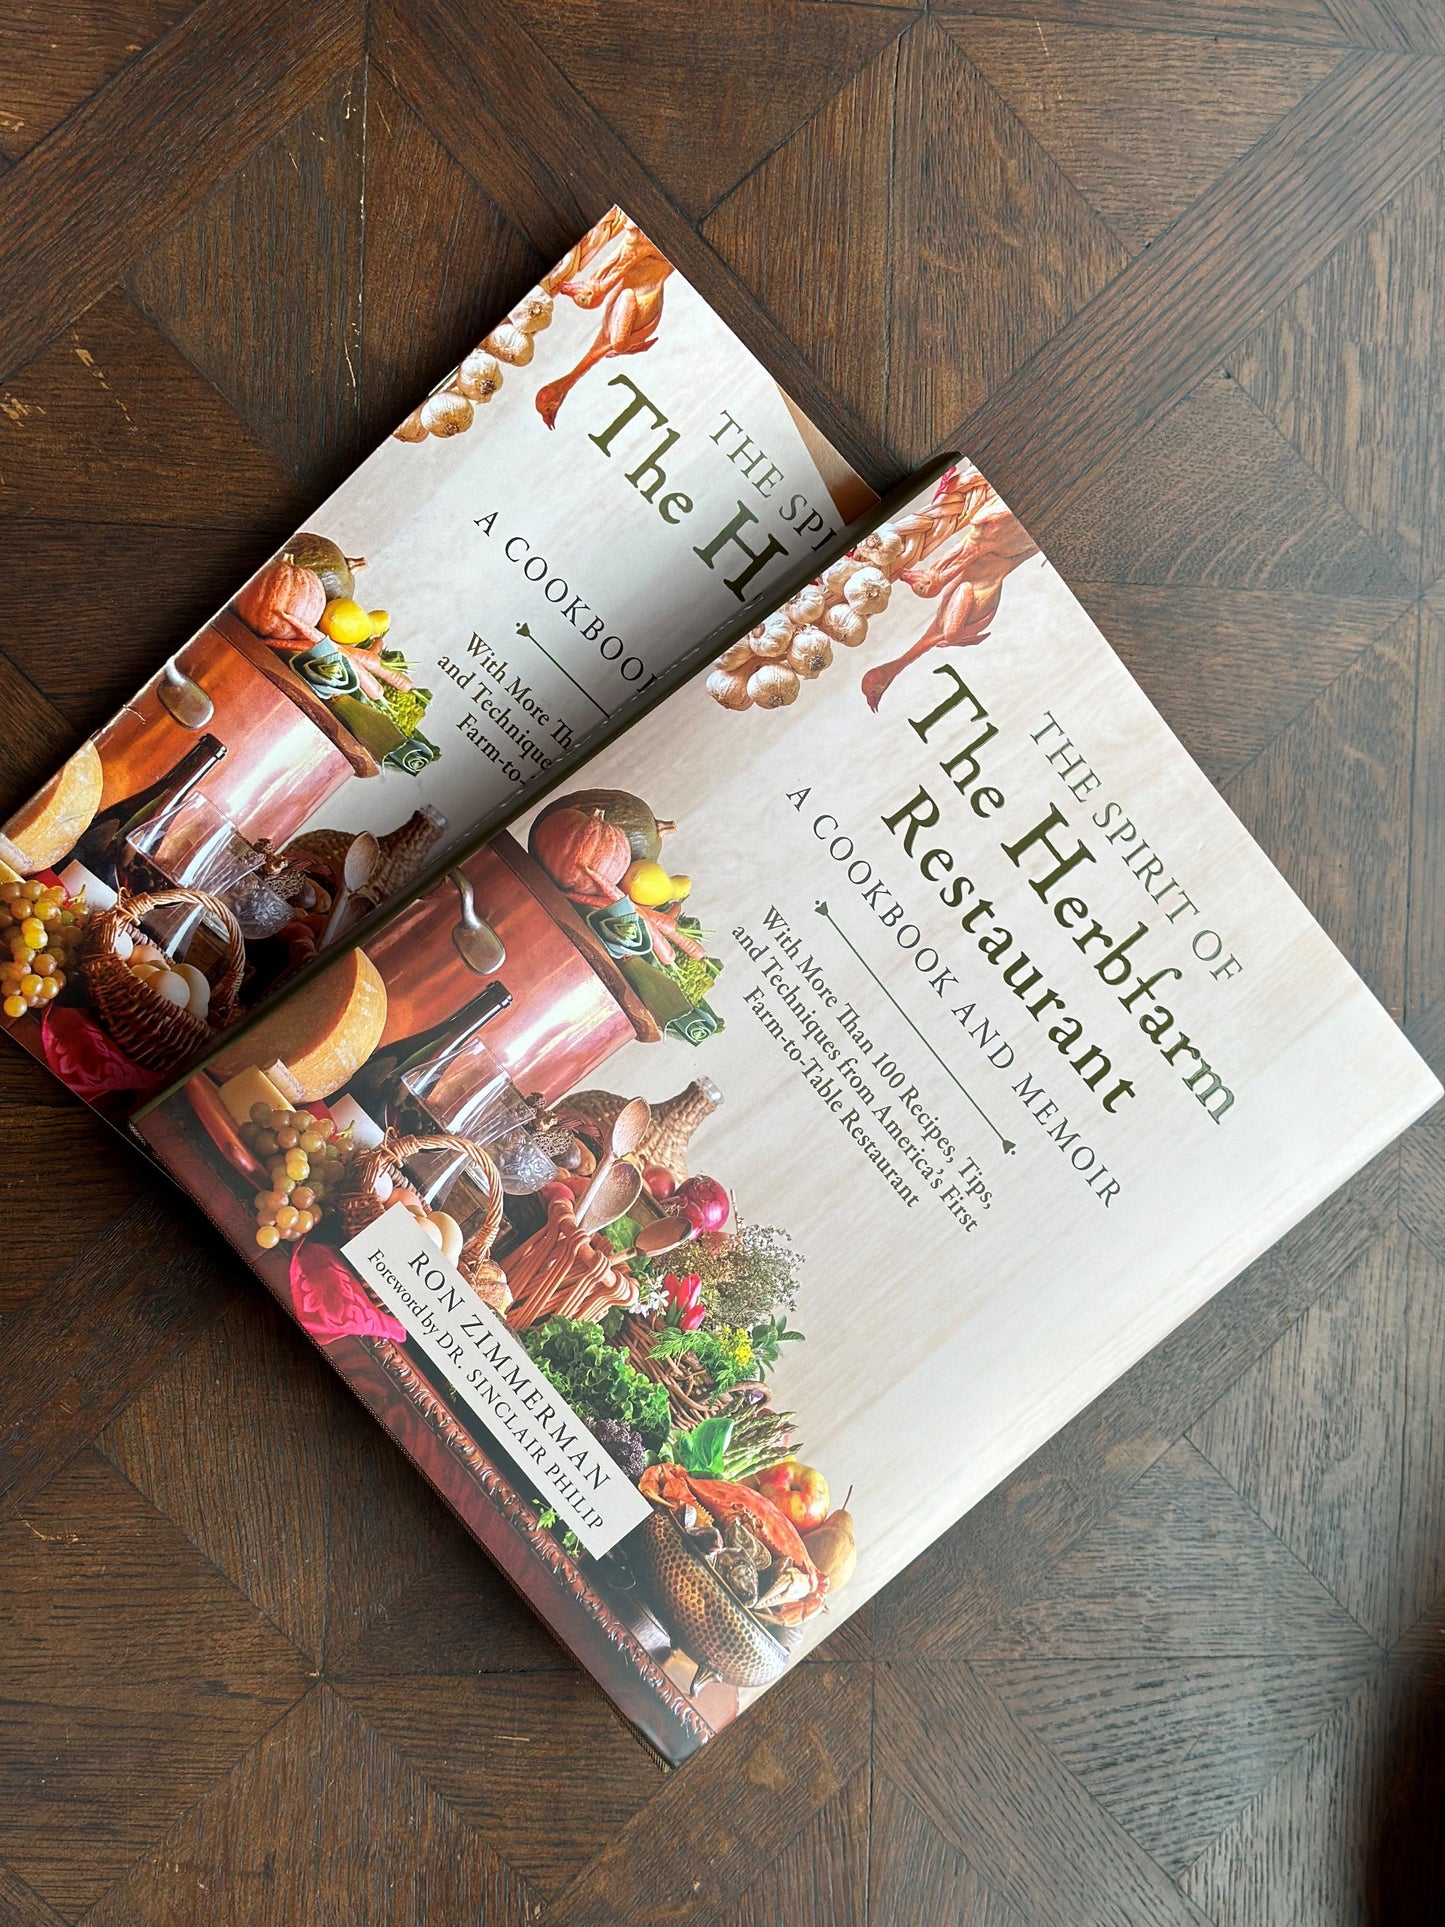 The Spirit of The Herbfarm Restaurant - A Cookbook and Memoir by Ron Zimmerman